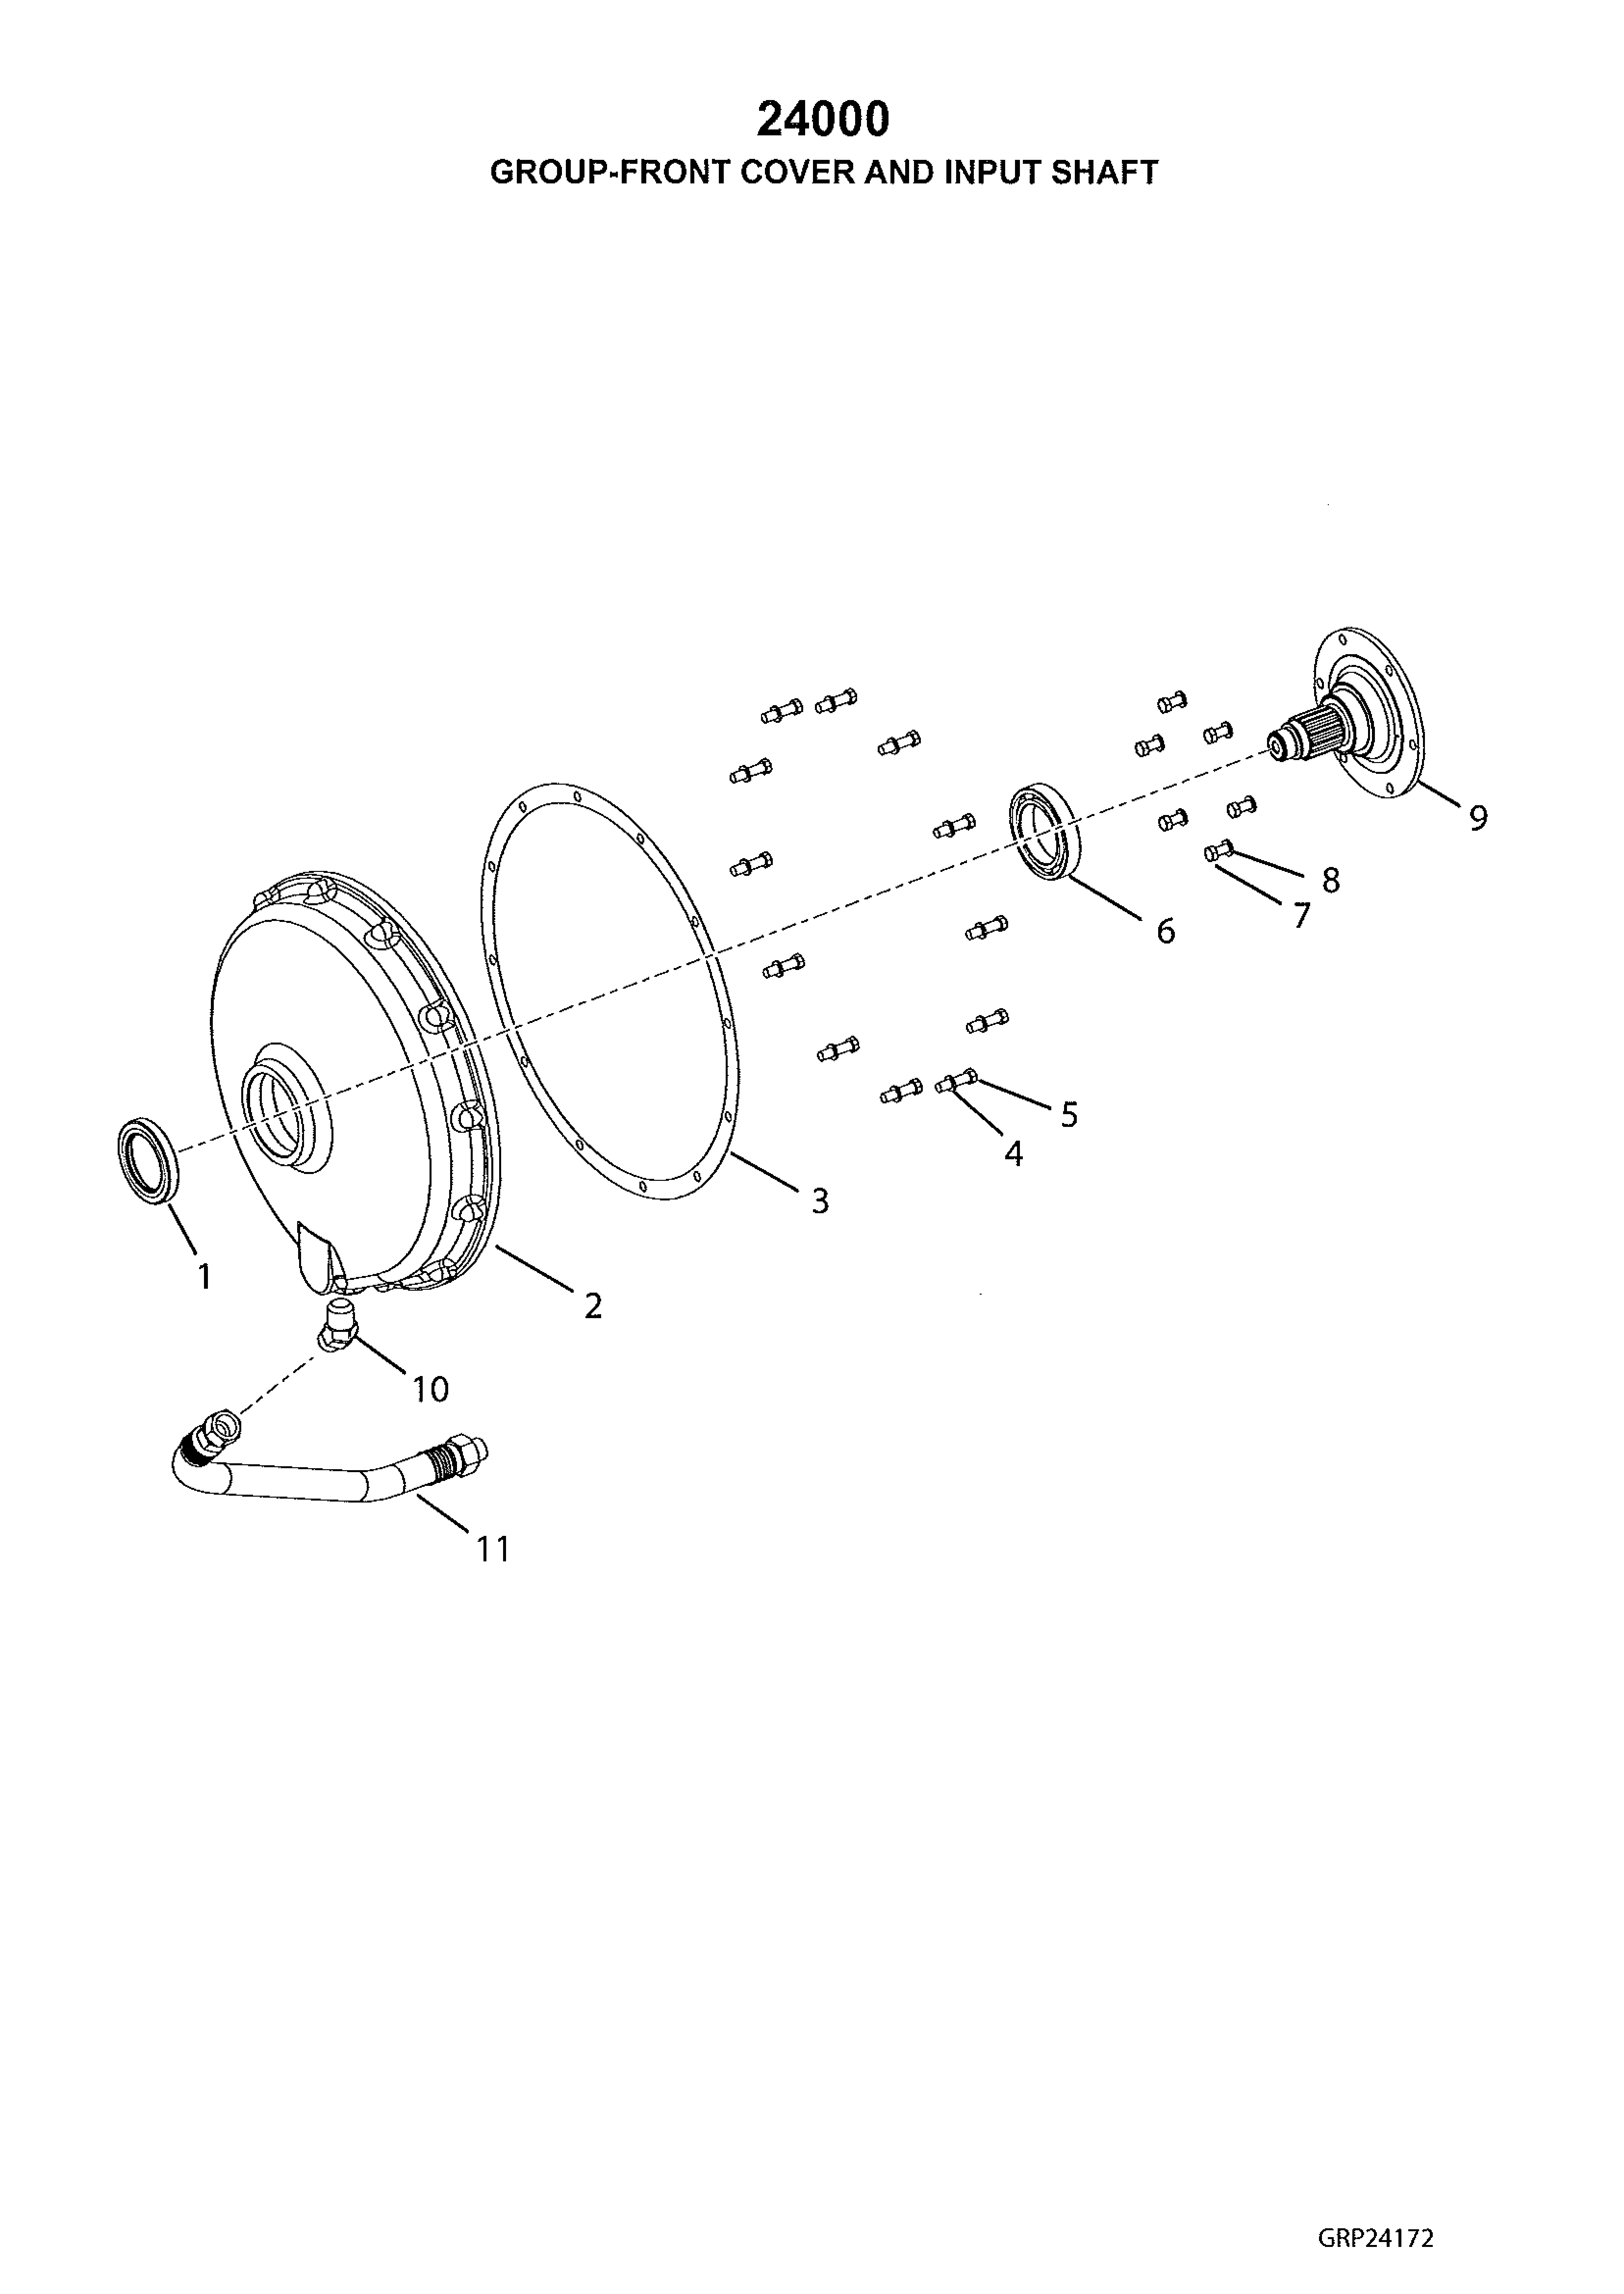 drawing for VALLEE CK230954 - OIL SEAL (figure 4)